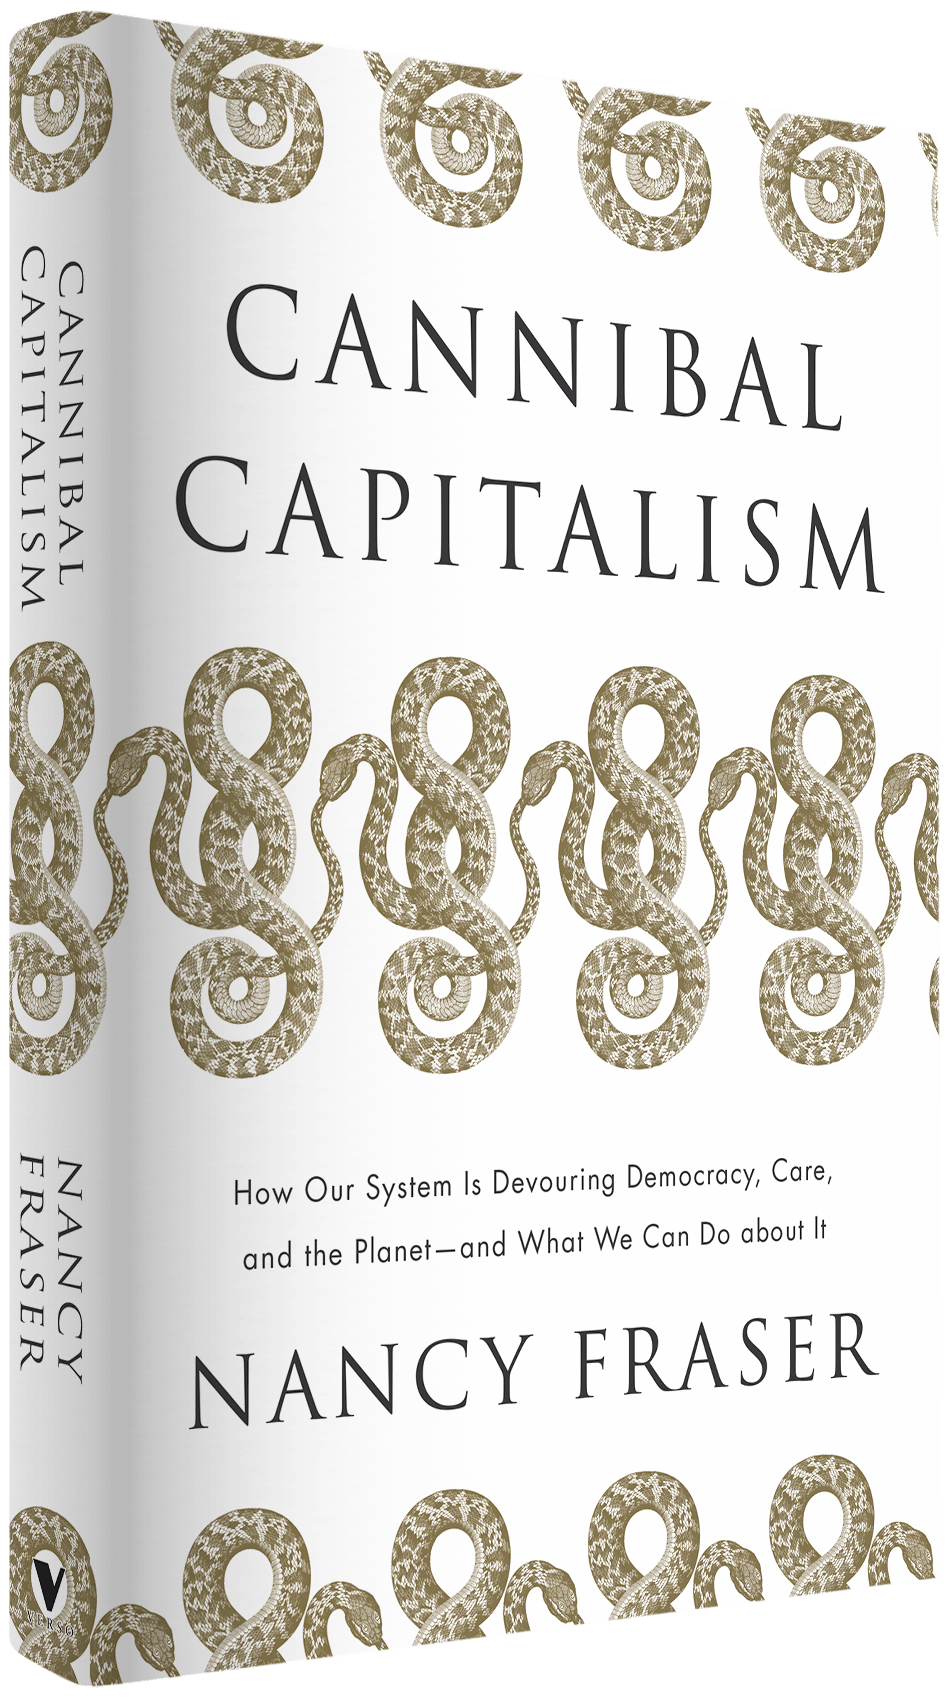 Nancy Fraser: Cannibal Capitalism. How Our System Is Devouring Democracy, Care, and the Planet—and What We Can Do About It. Verso, September 2022